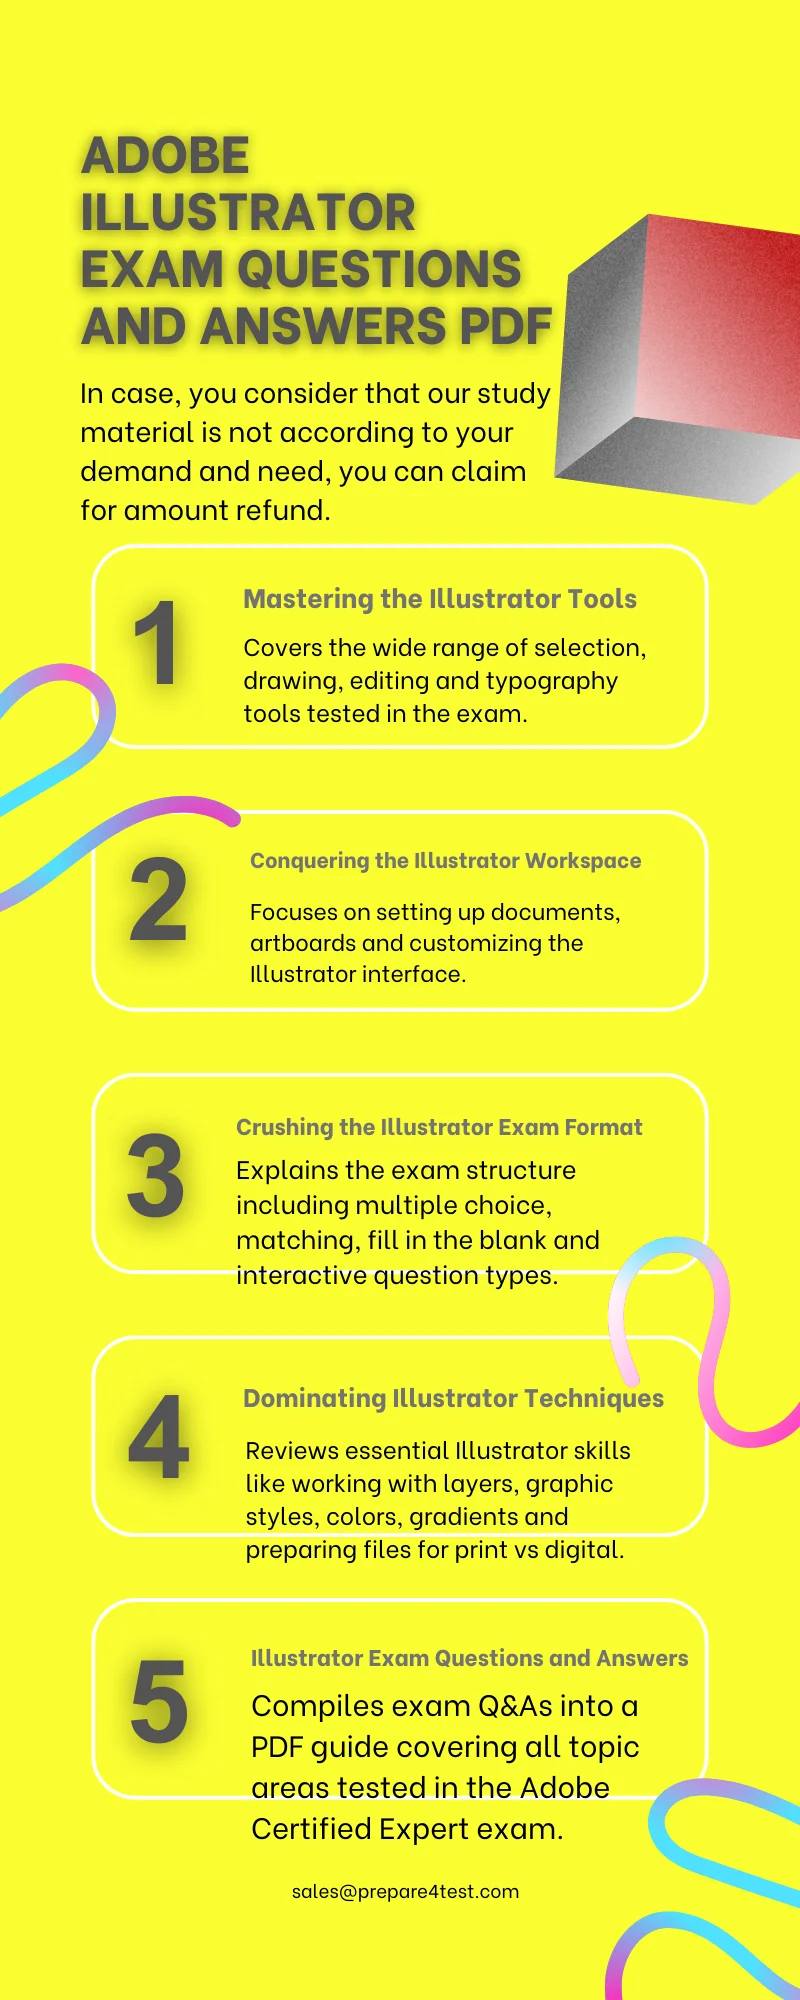 Adobe Illustrator Exam Questions and Answers PDF Infographic